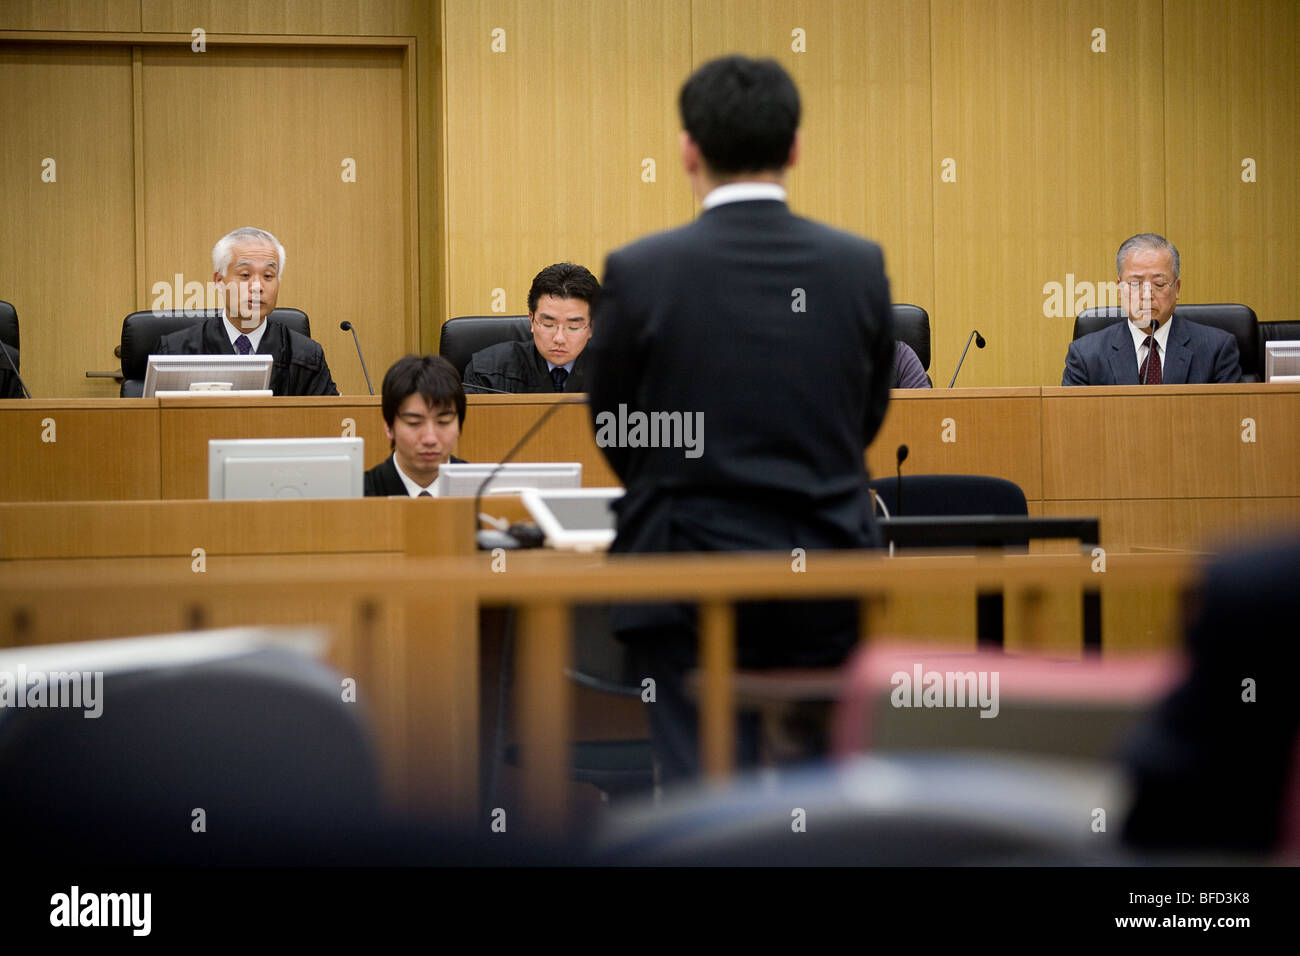 a 'mock' jury/court case being acted out in a Japanese law court. Stock Photo